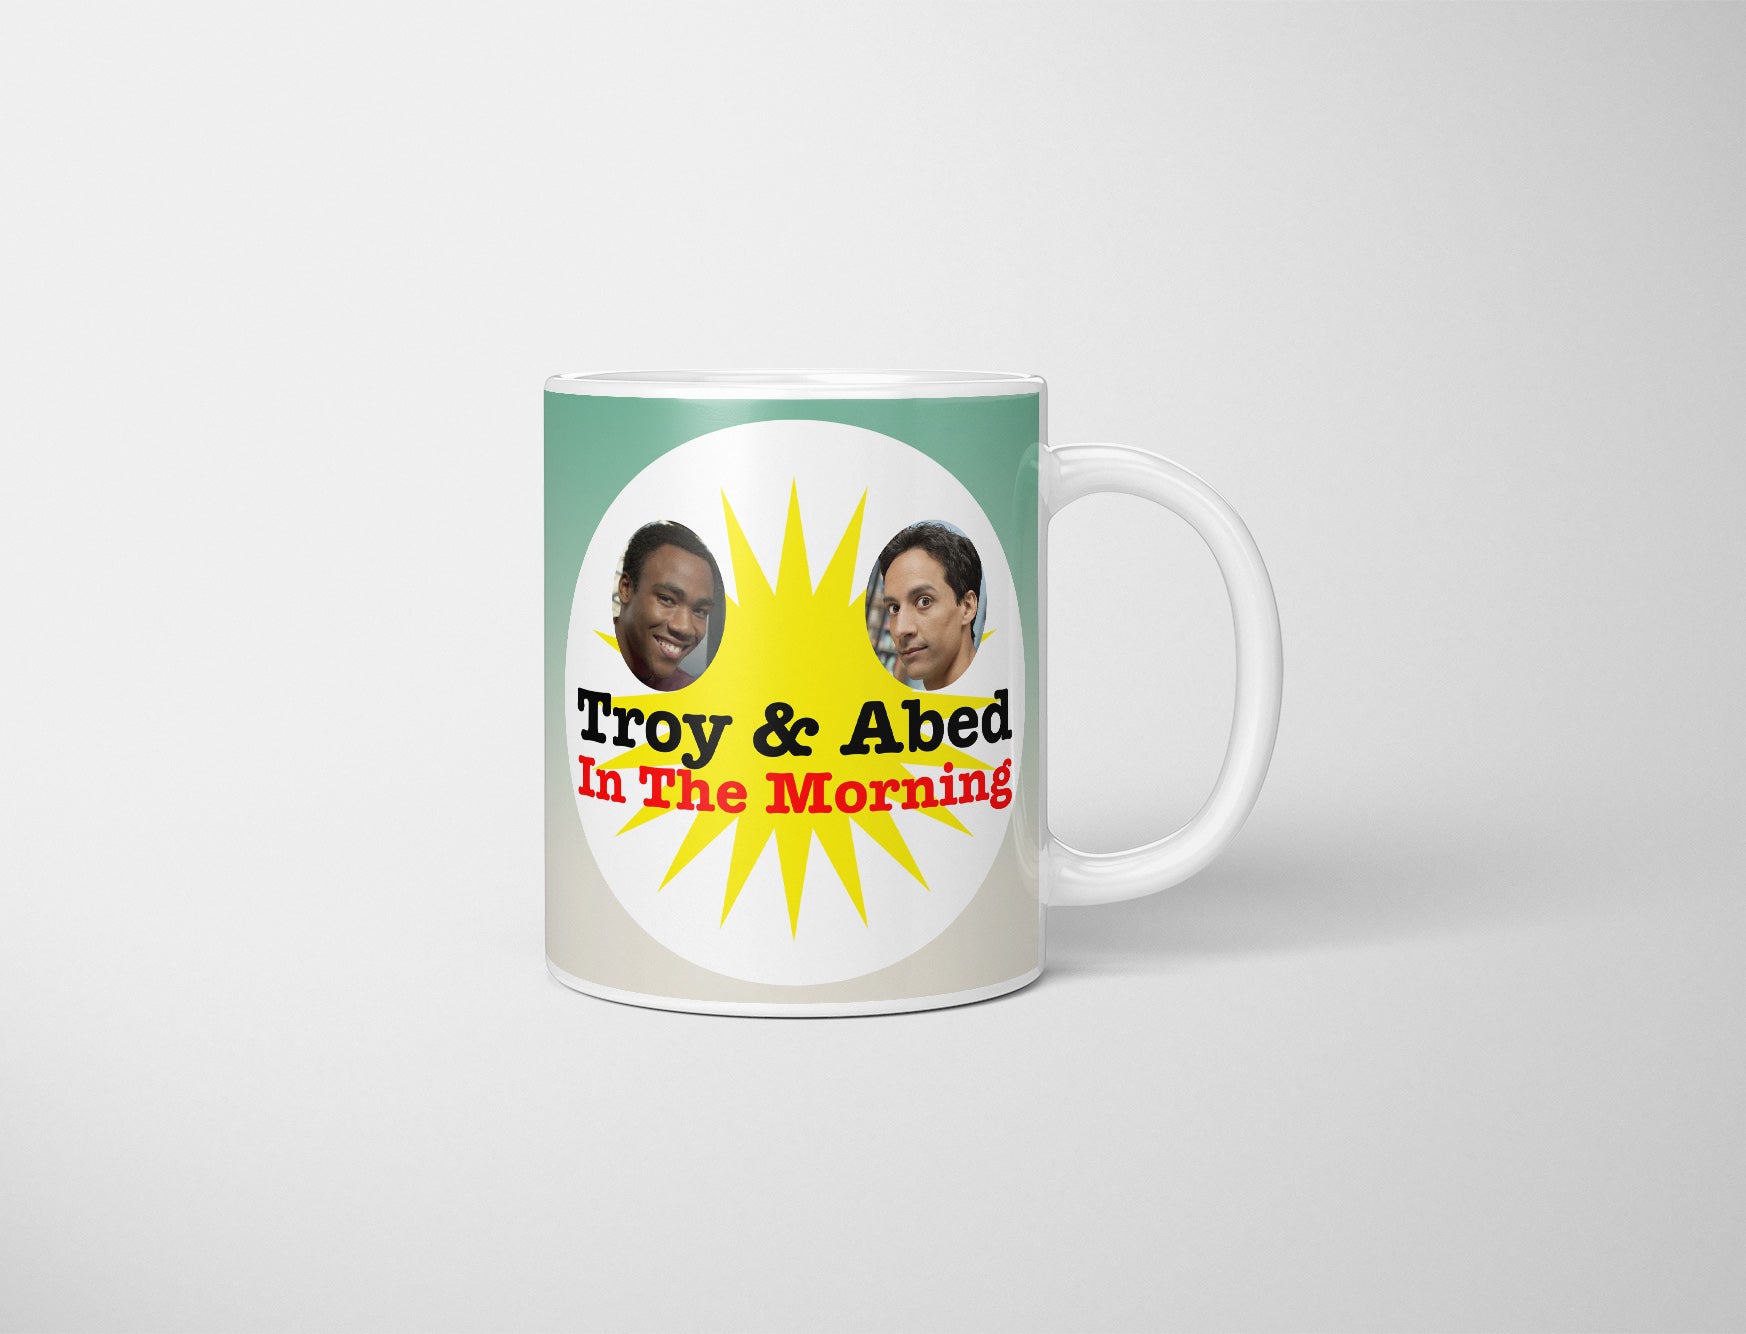 A beautiful 11oz mug with our version of the iconic 'Troy & Abed In The Morning' mug, featured on the hilarious show, Community. A must have for any Community or Troy & Abed fan!